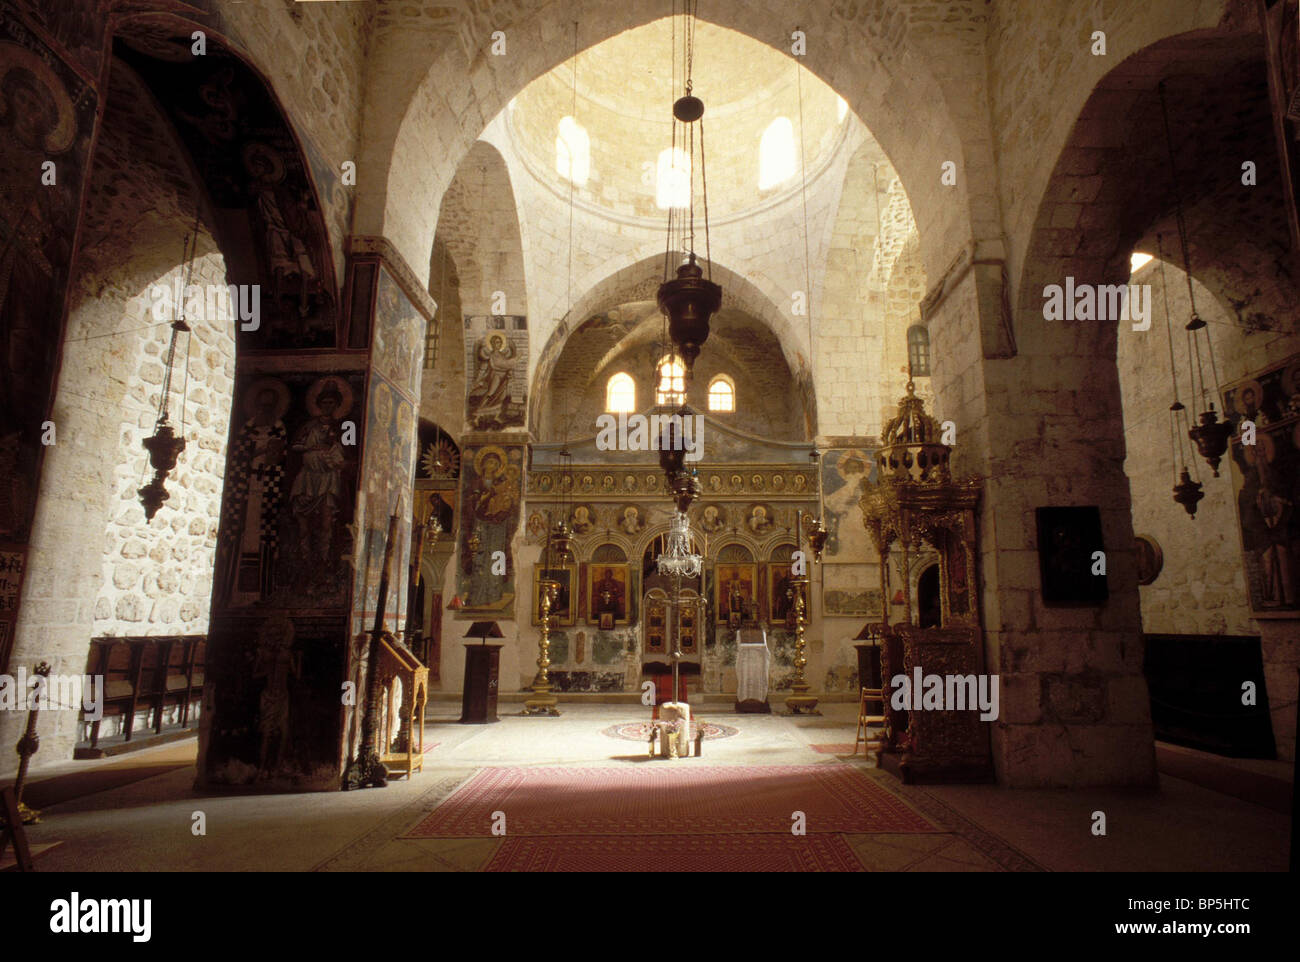 3314. MONASTERY OF THE CROSS IN JERUSALEM, THE CHURCH BUILT BY THE CRUSADERS IN 12-13TH. C. Stock Photo